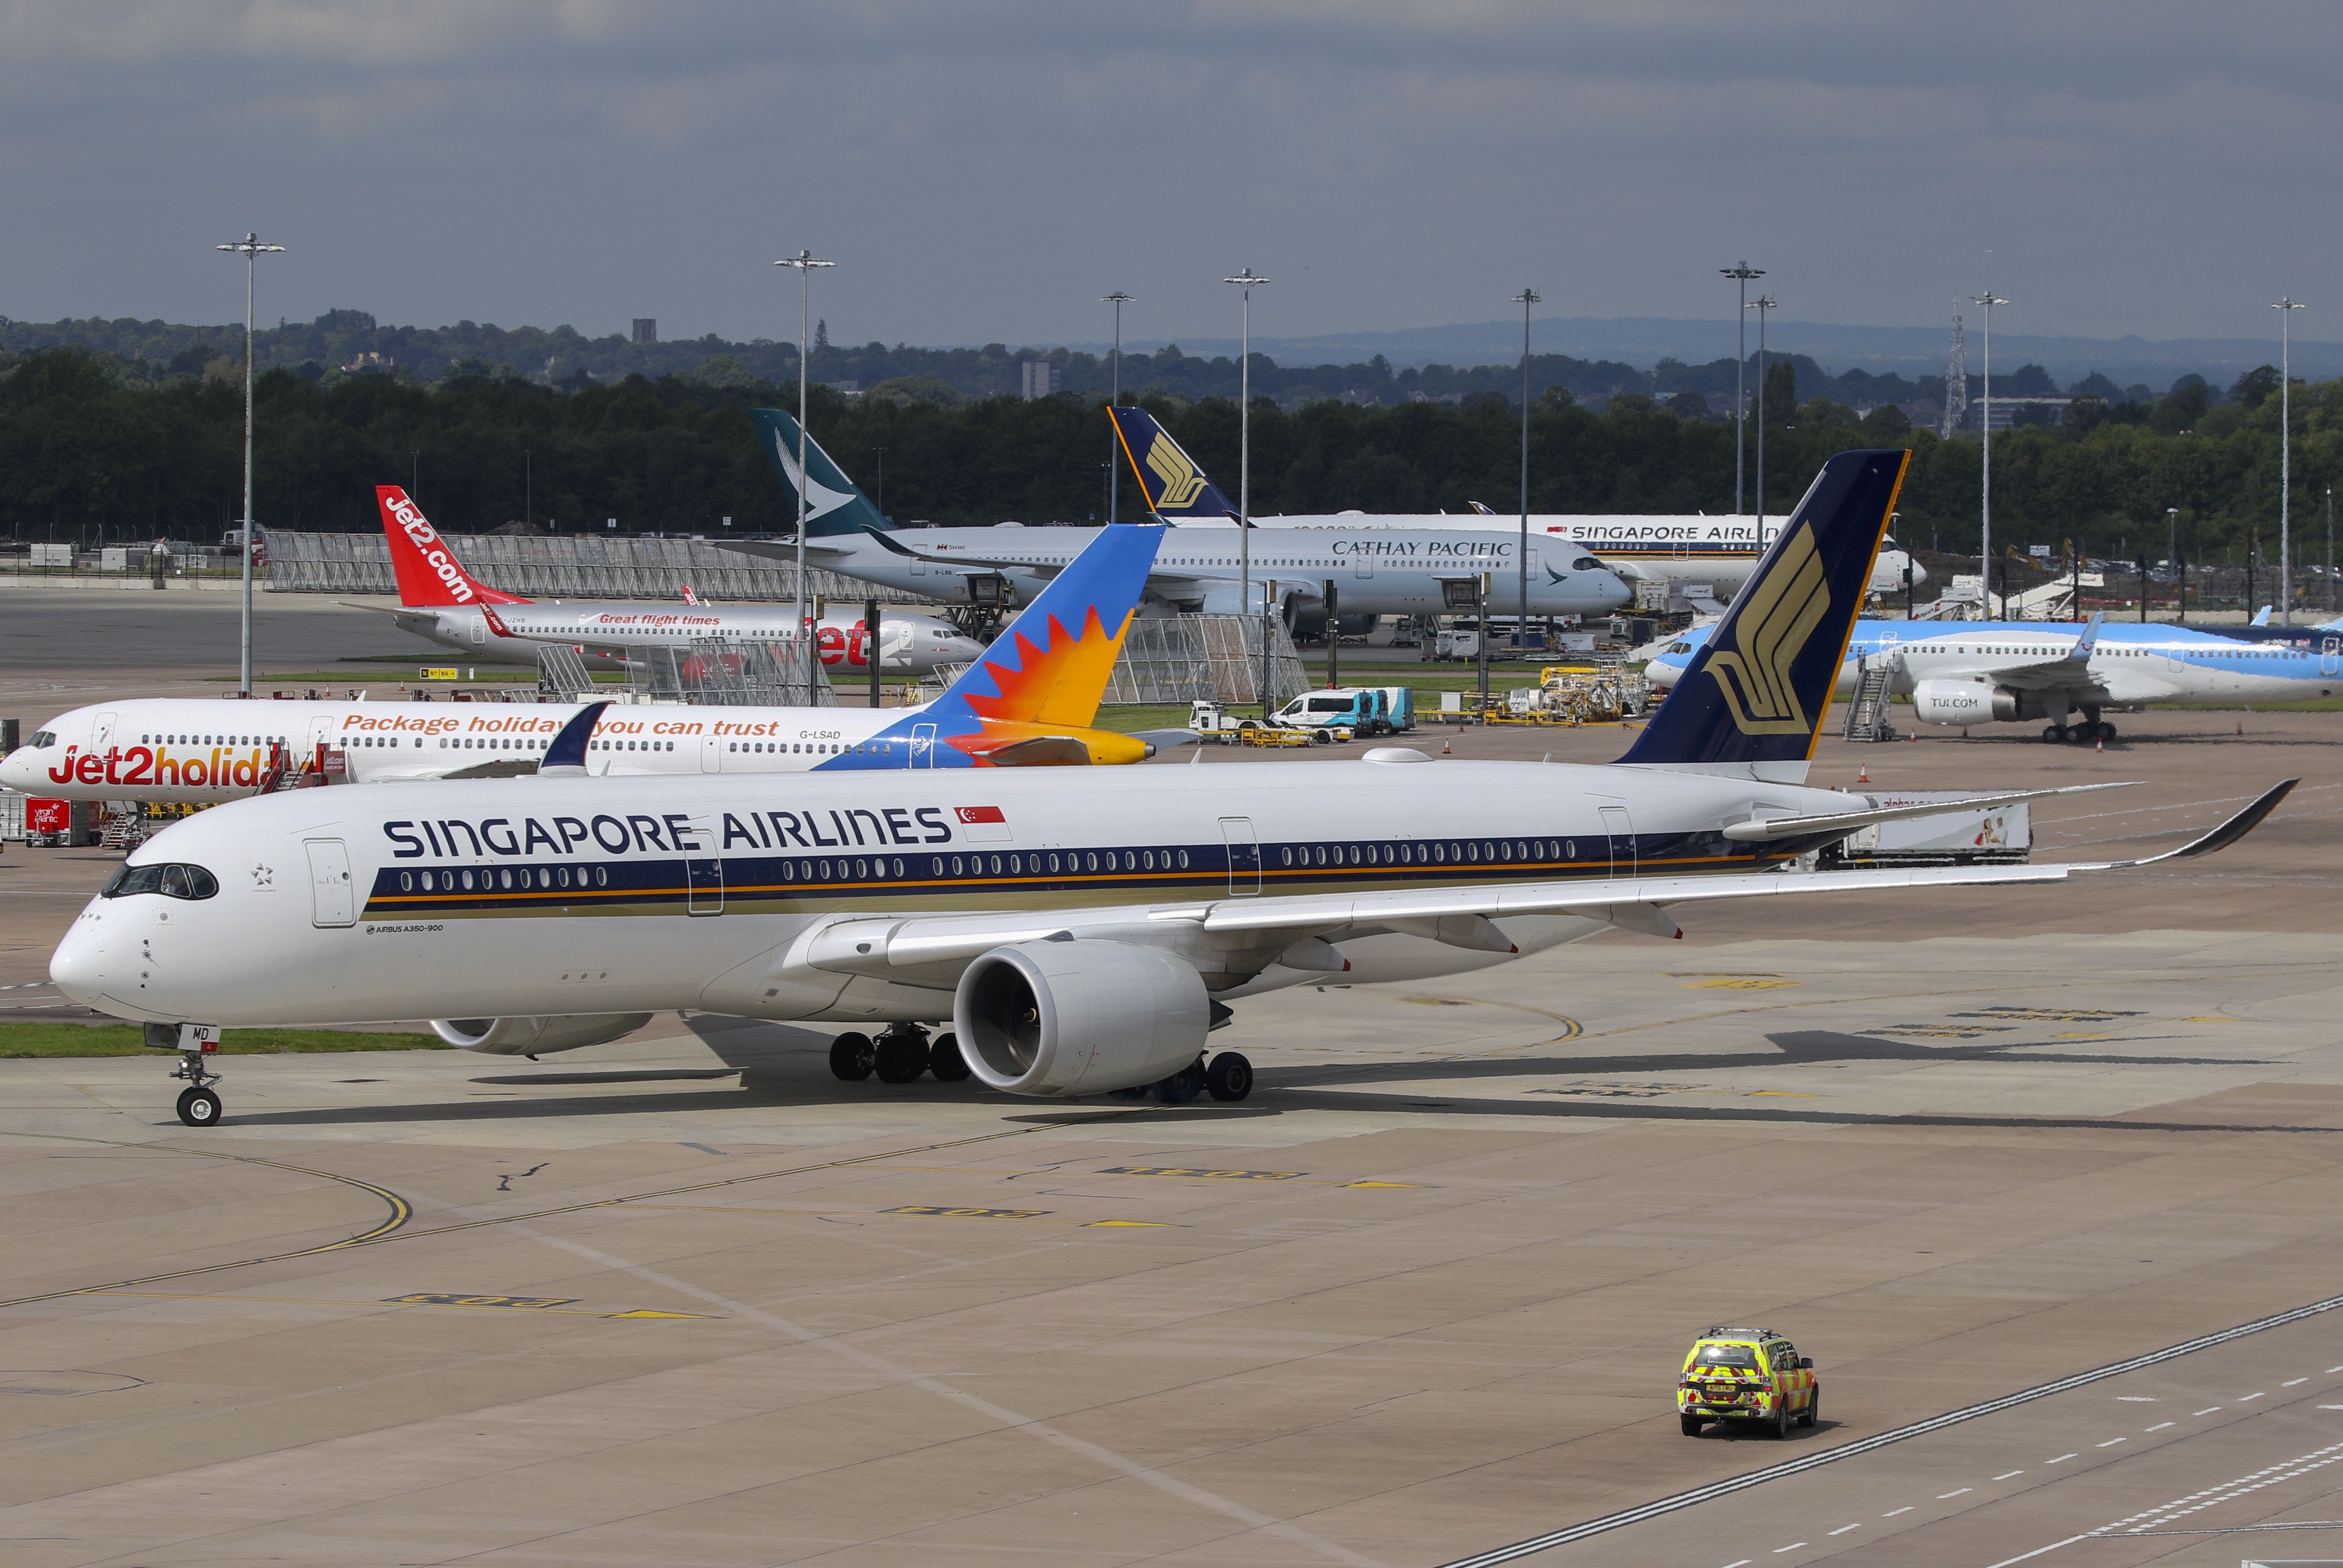 Singapore Airlines Airbus A350-900 at Manchester Airport